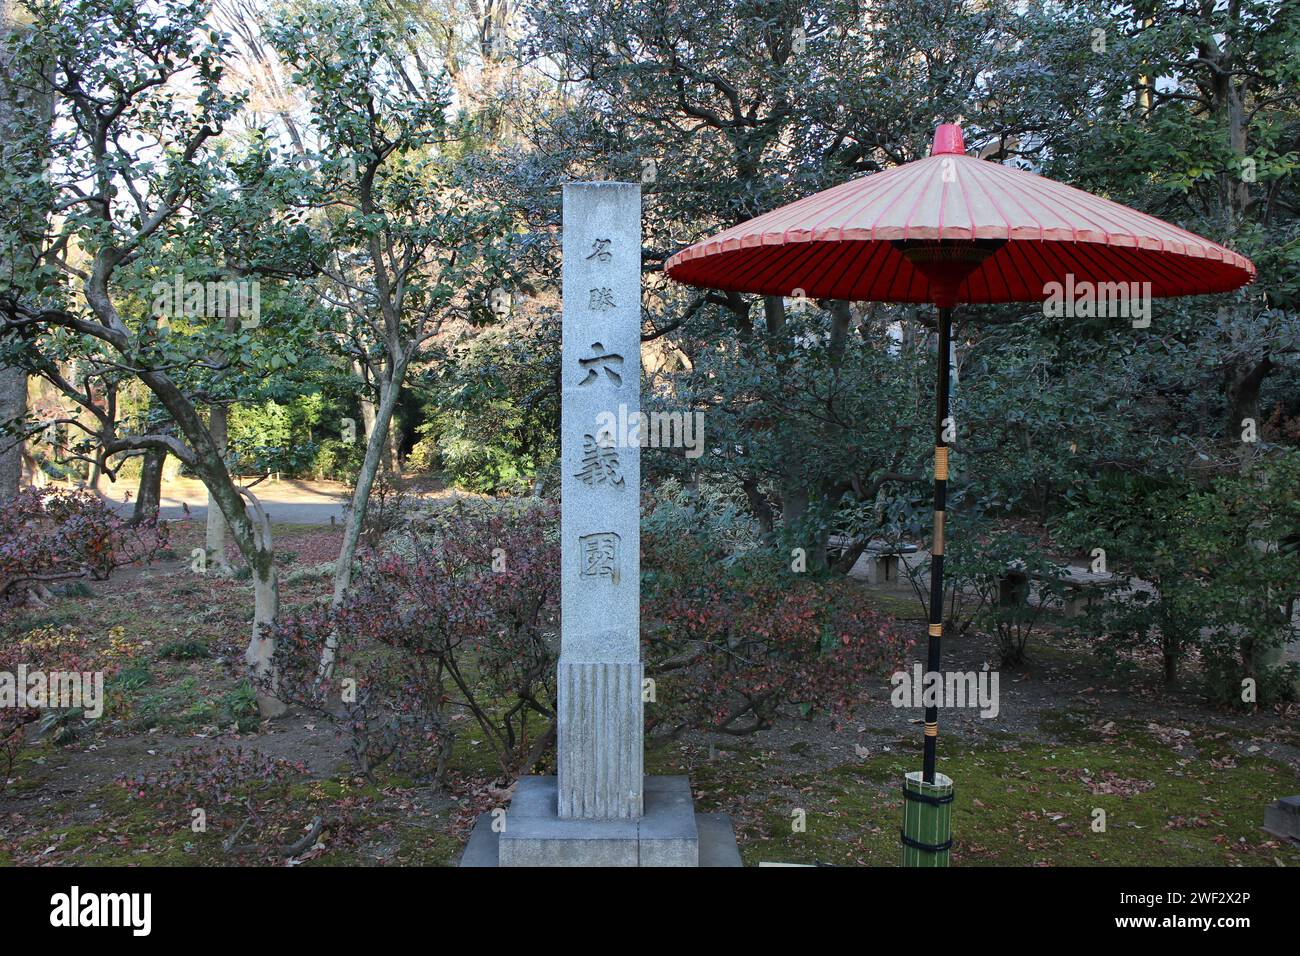 Stone monument and traditional umbrella in Rikugien Garden, Tokyo, Japan (Japanese words mean the name of garden 'Rikugien') Stock Photo